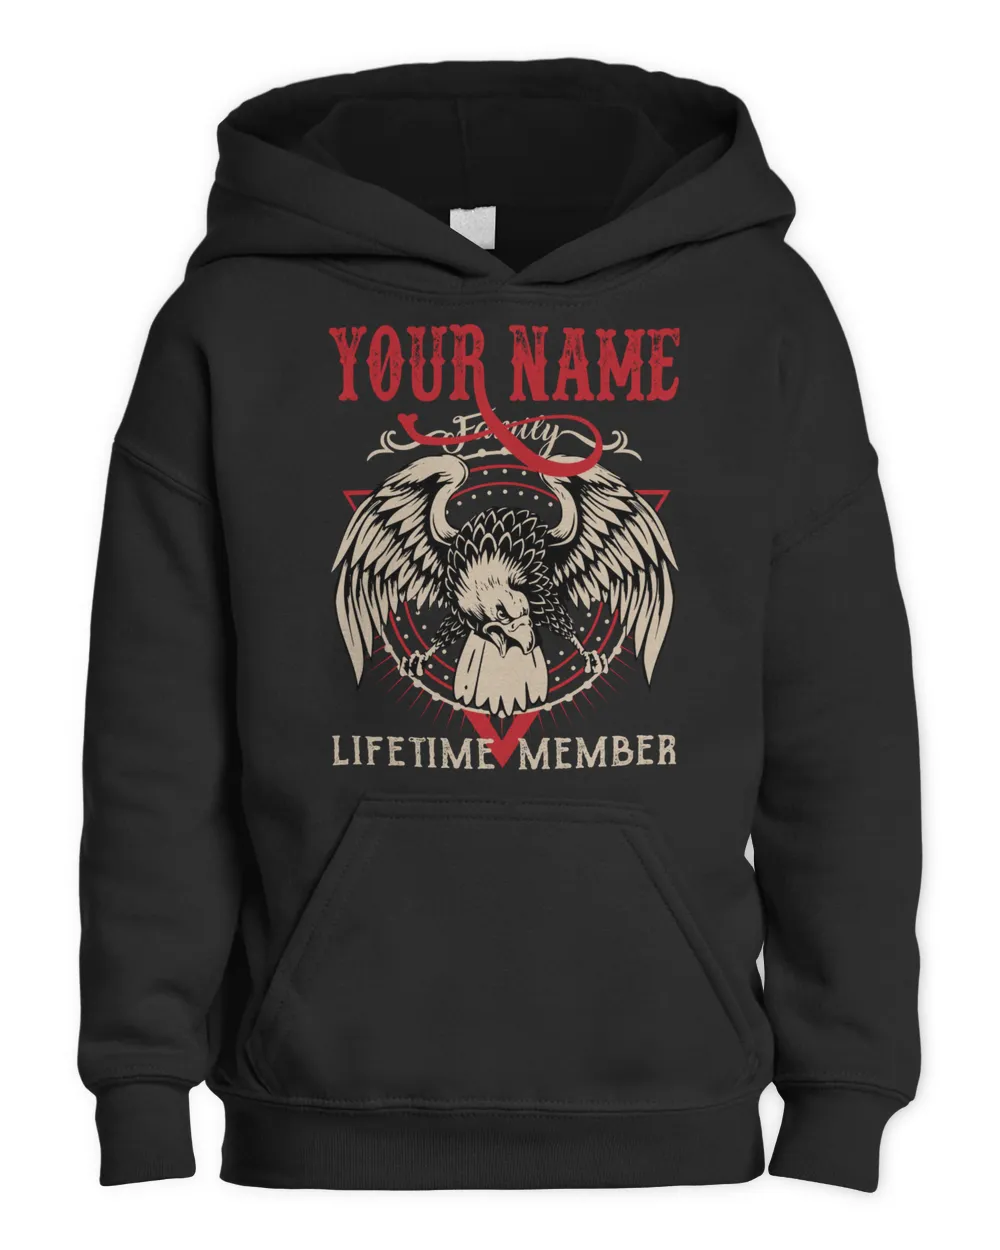 Your Name ! Lifetime member ! personalize t-shirt